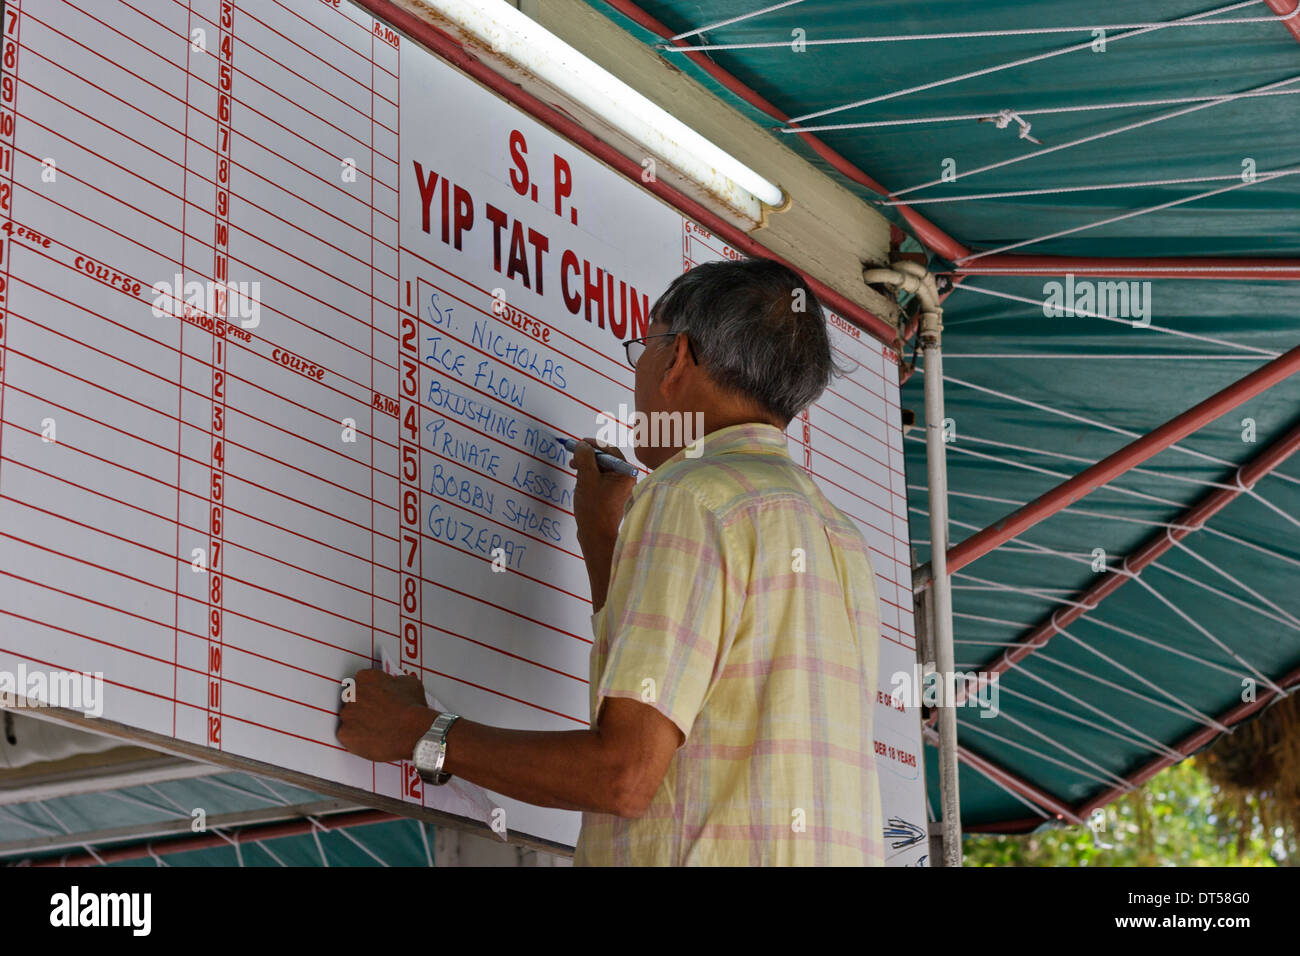 A bookmaker updating the betting board, Champs de Mars, Mauritius. Stock Photo